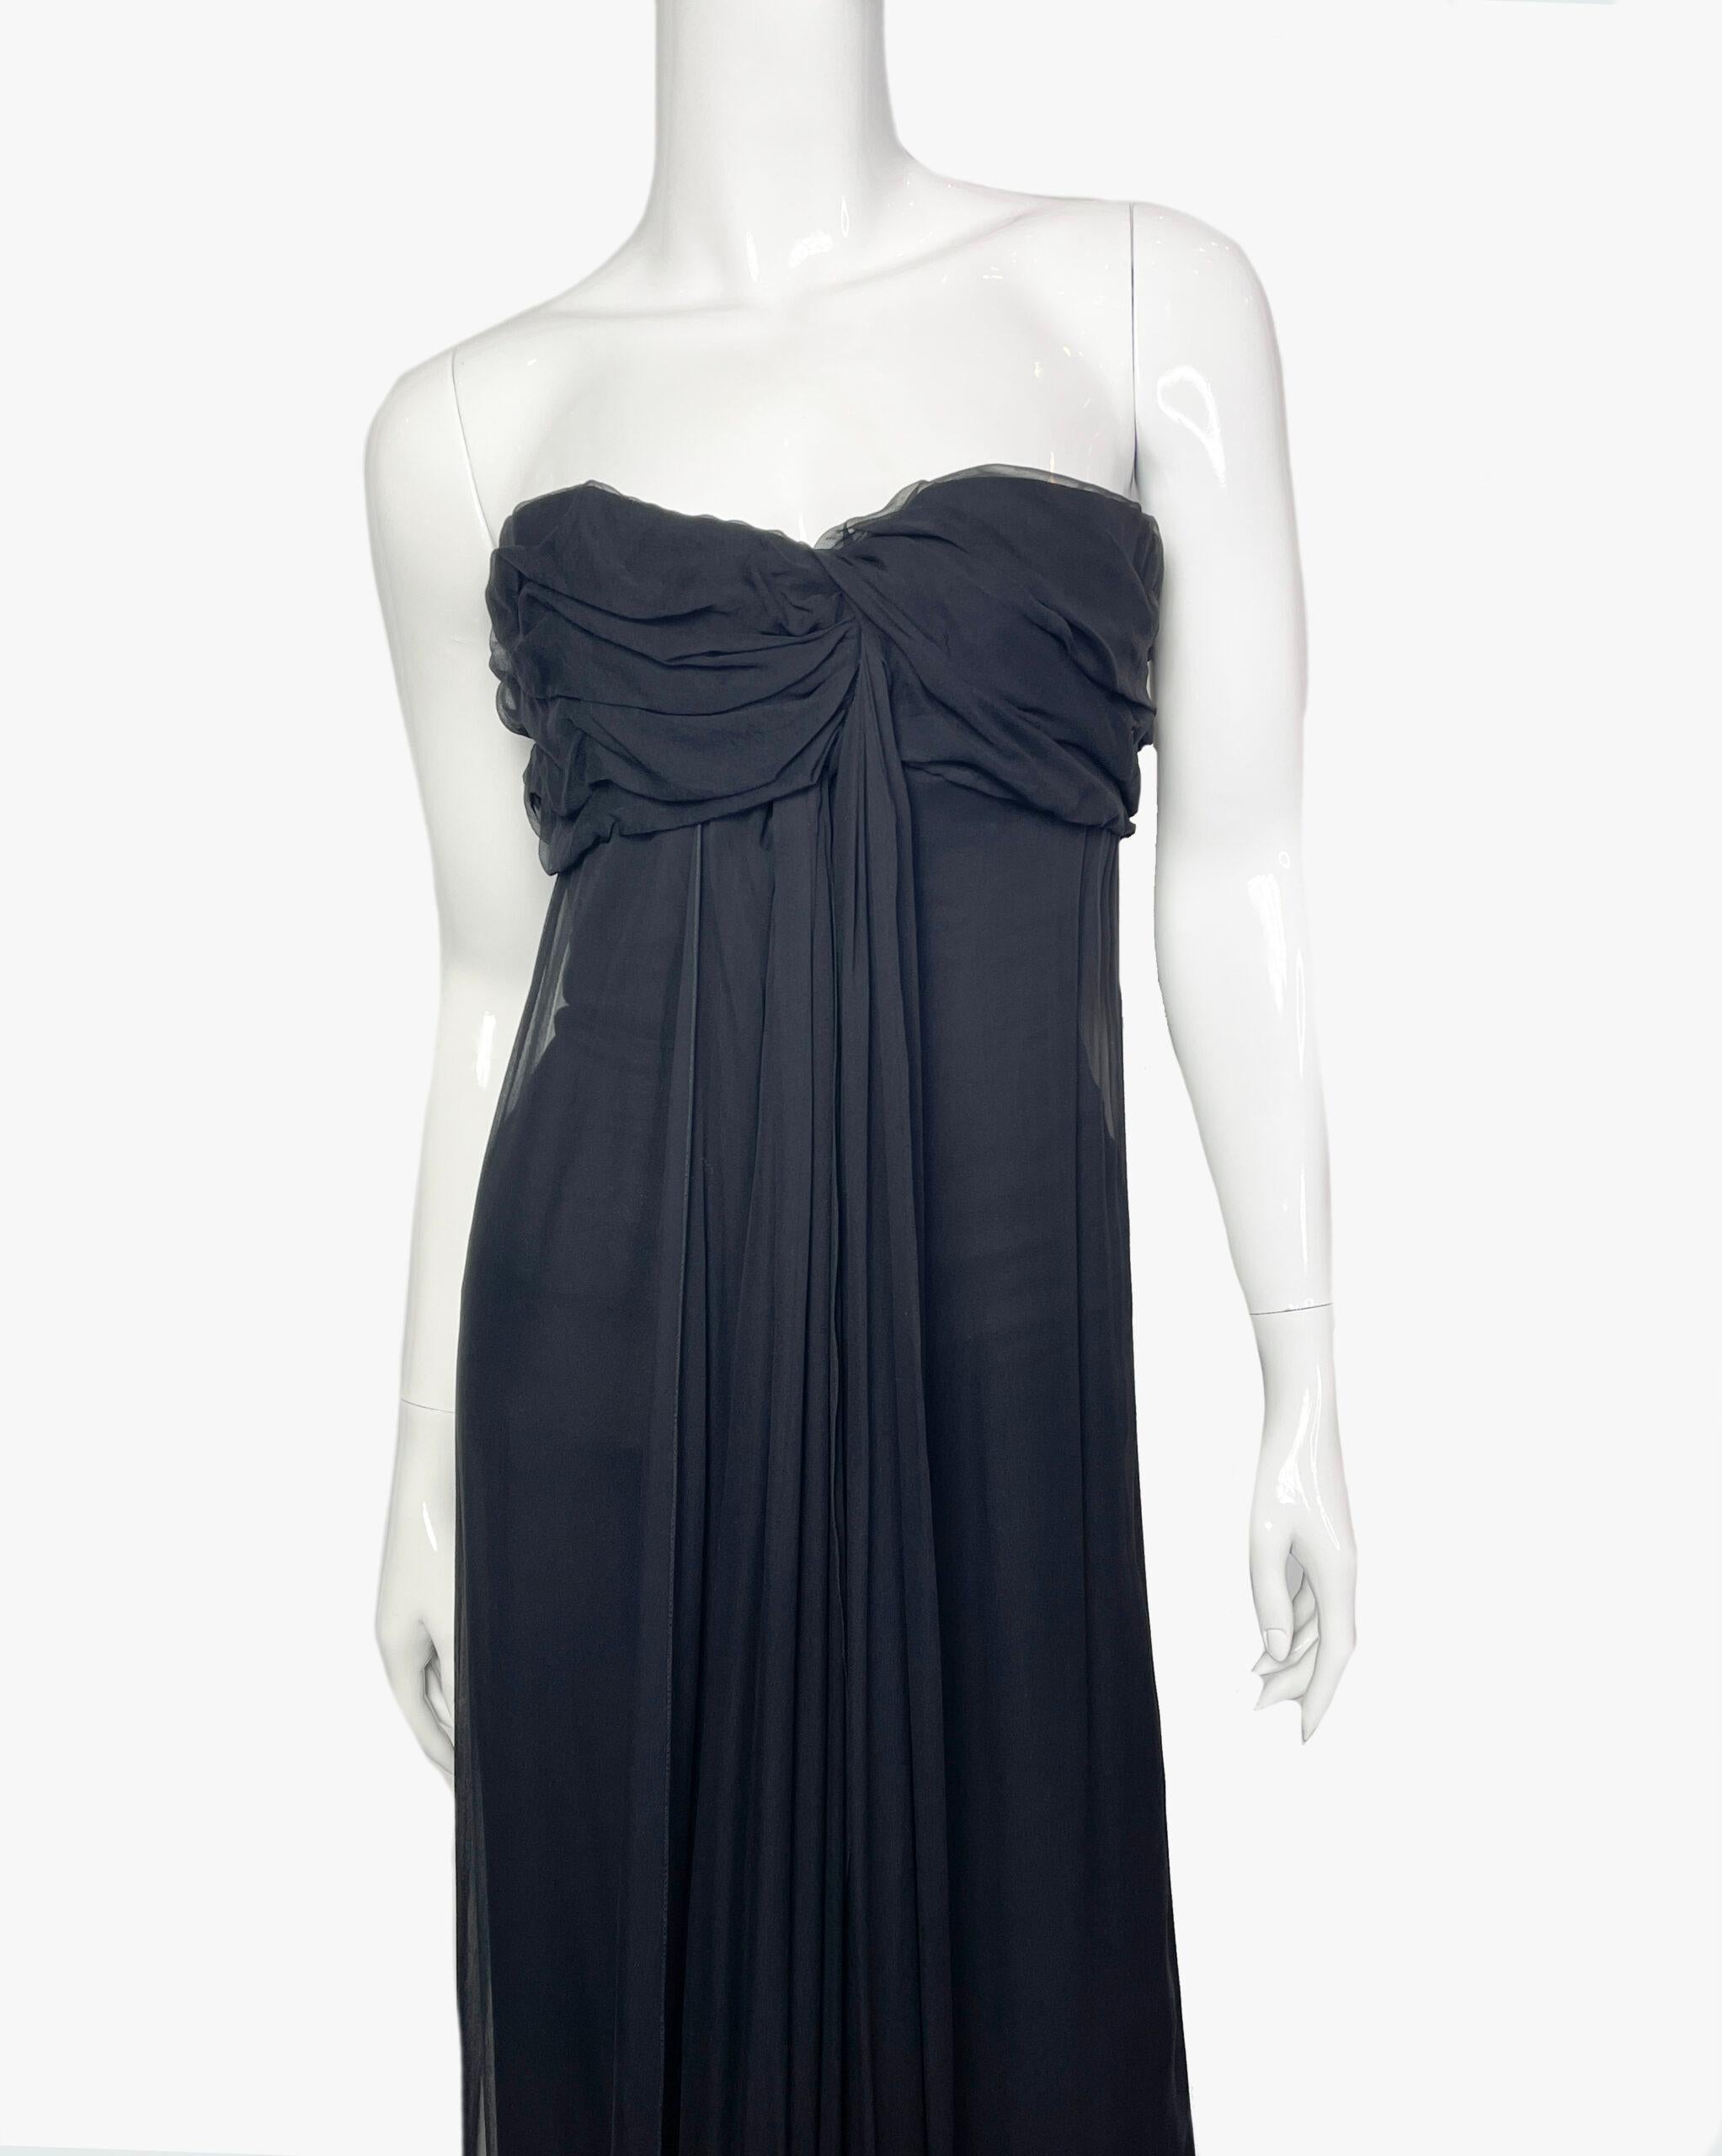 Vintage Yves Saint Laurent silk bustier dress with draping on the chest. The perfect dress for an evening out. 
The inner corset tightly fixes the bustier on the chest.
Fabric:  100% silk
Size: M
Condition: Perfect